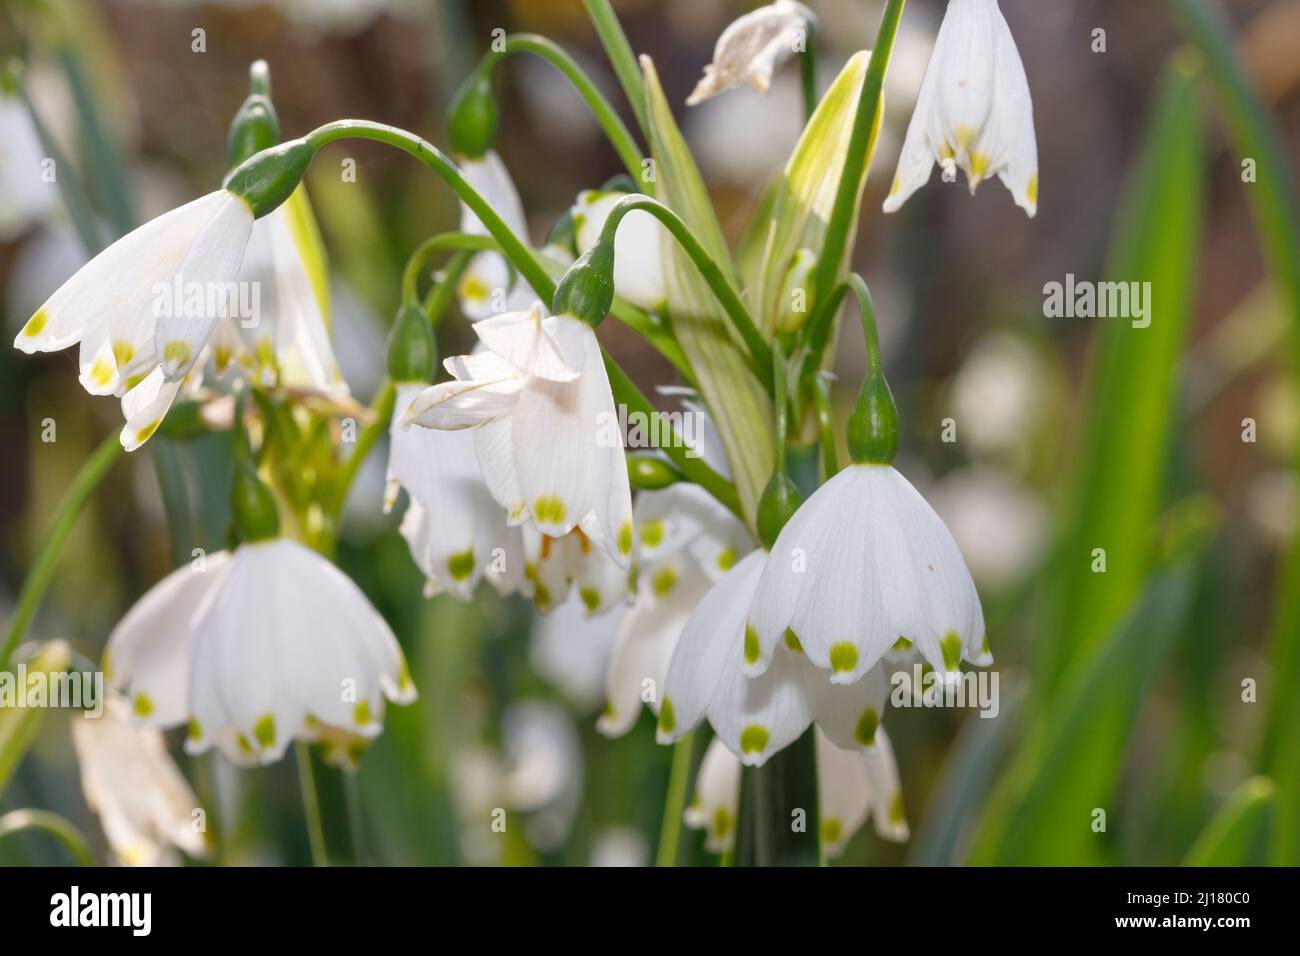 Lily of the valley (Convallaria majalis) flowers in springtime, Sussex, UK Stock Photo